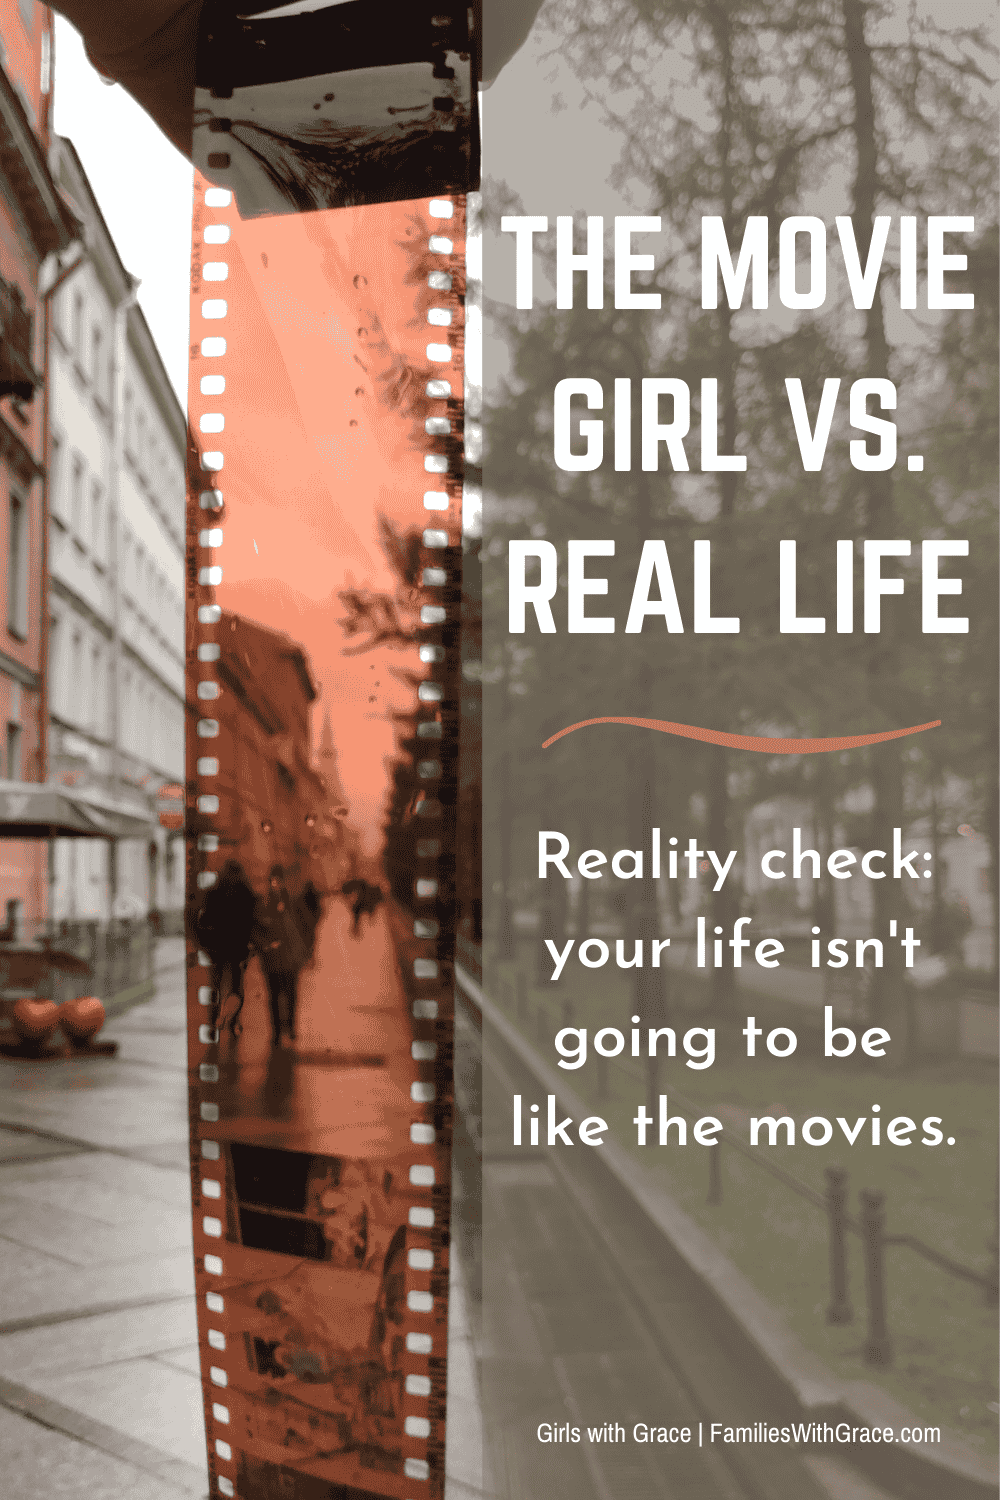 The movie girl vs. real life